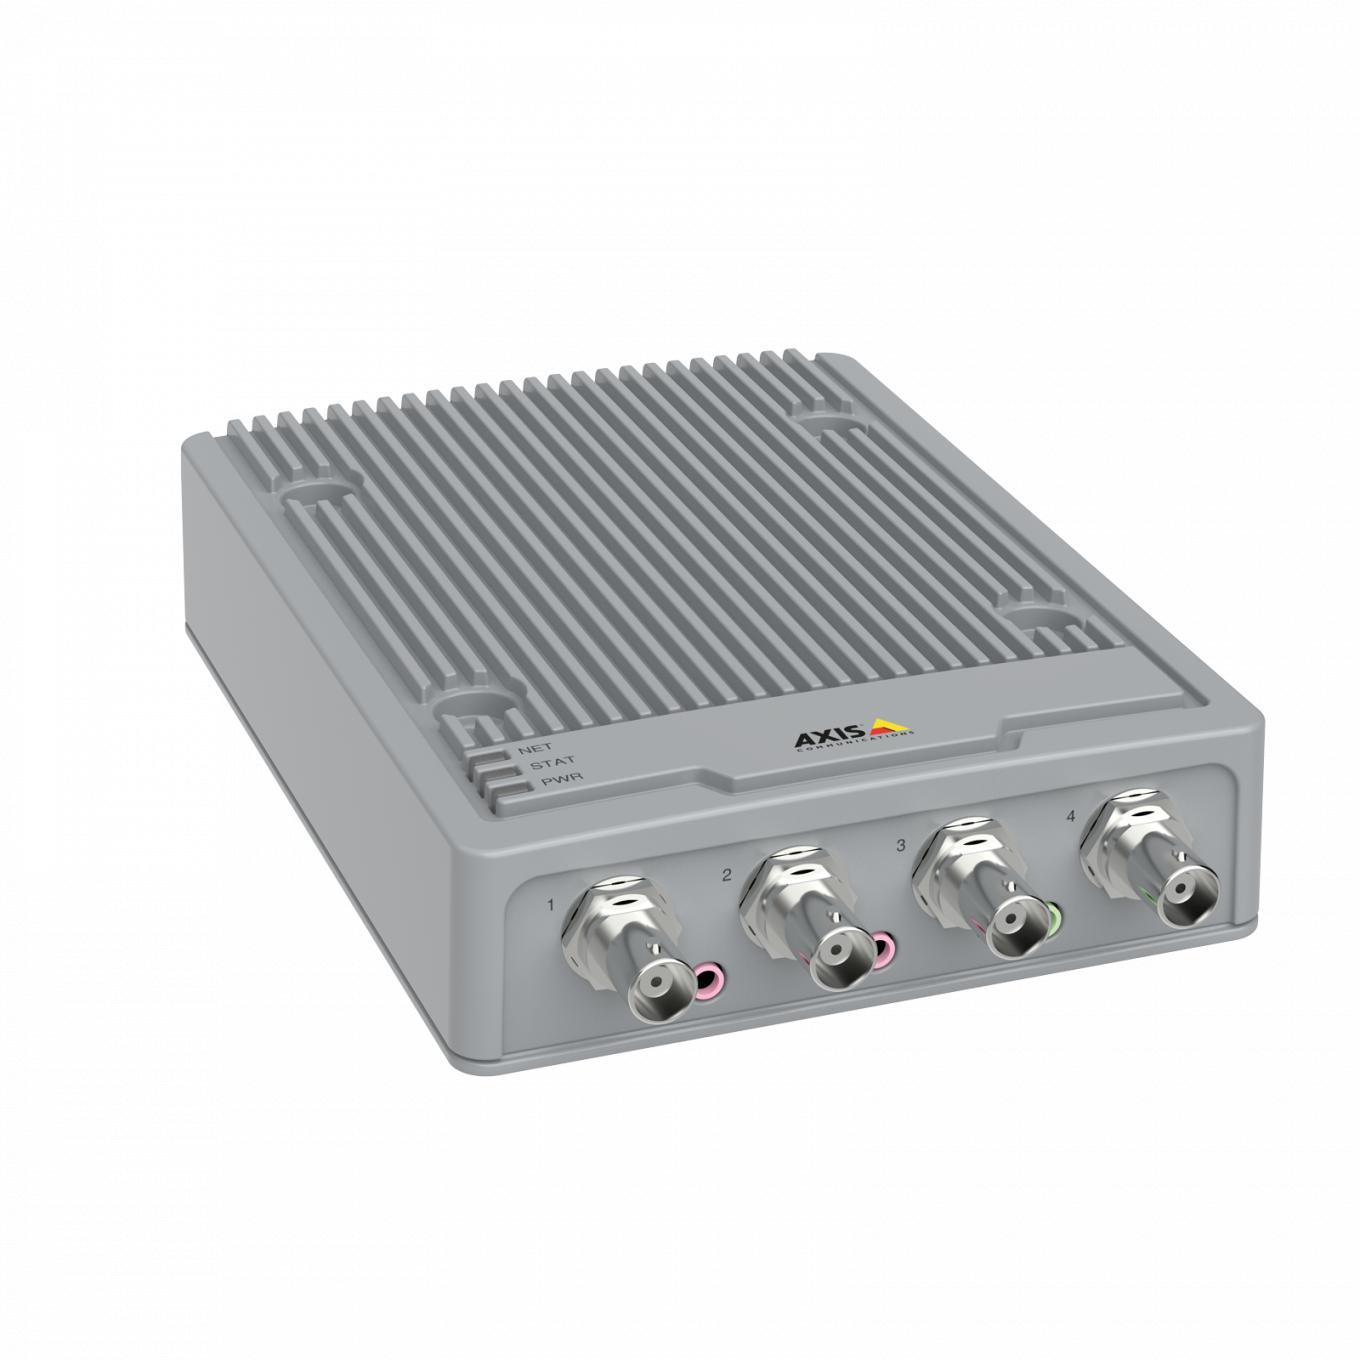 AXIS P7304 Video Encoder from right angle